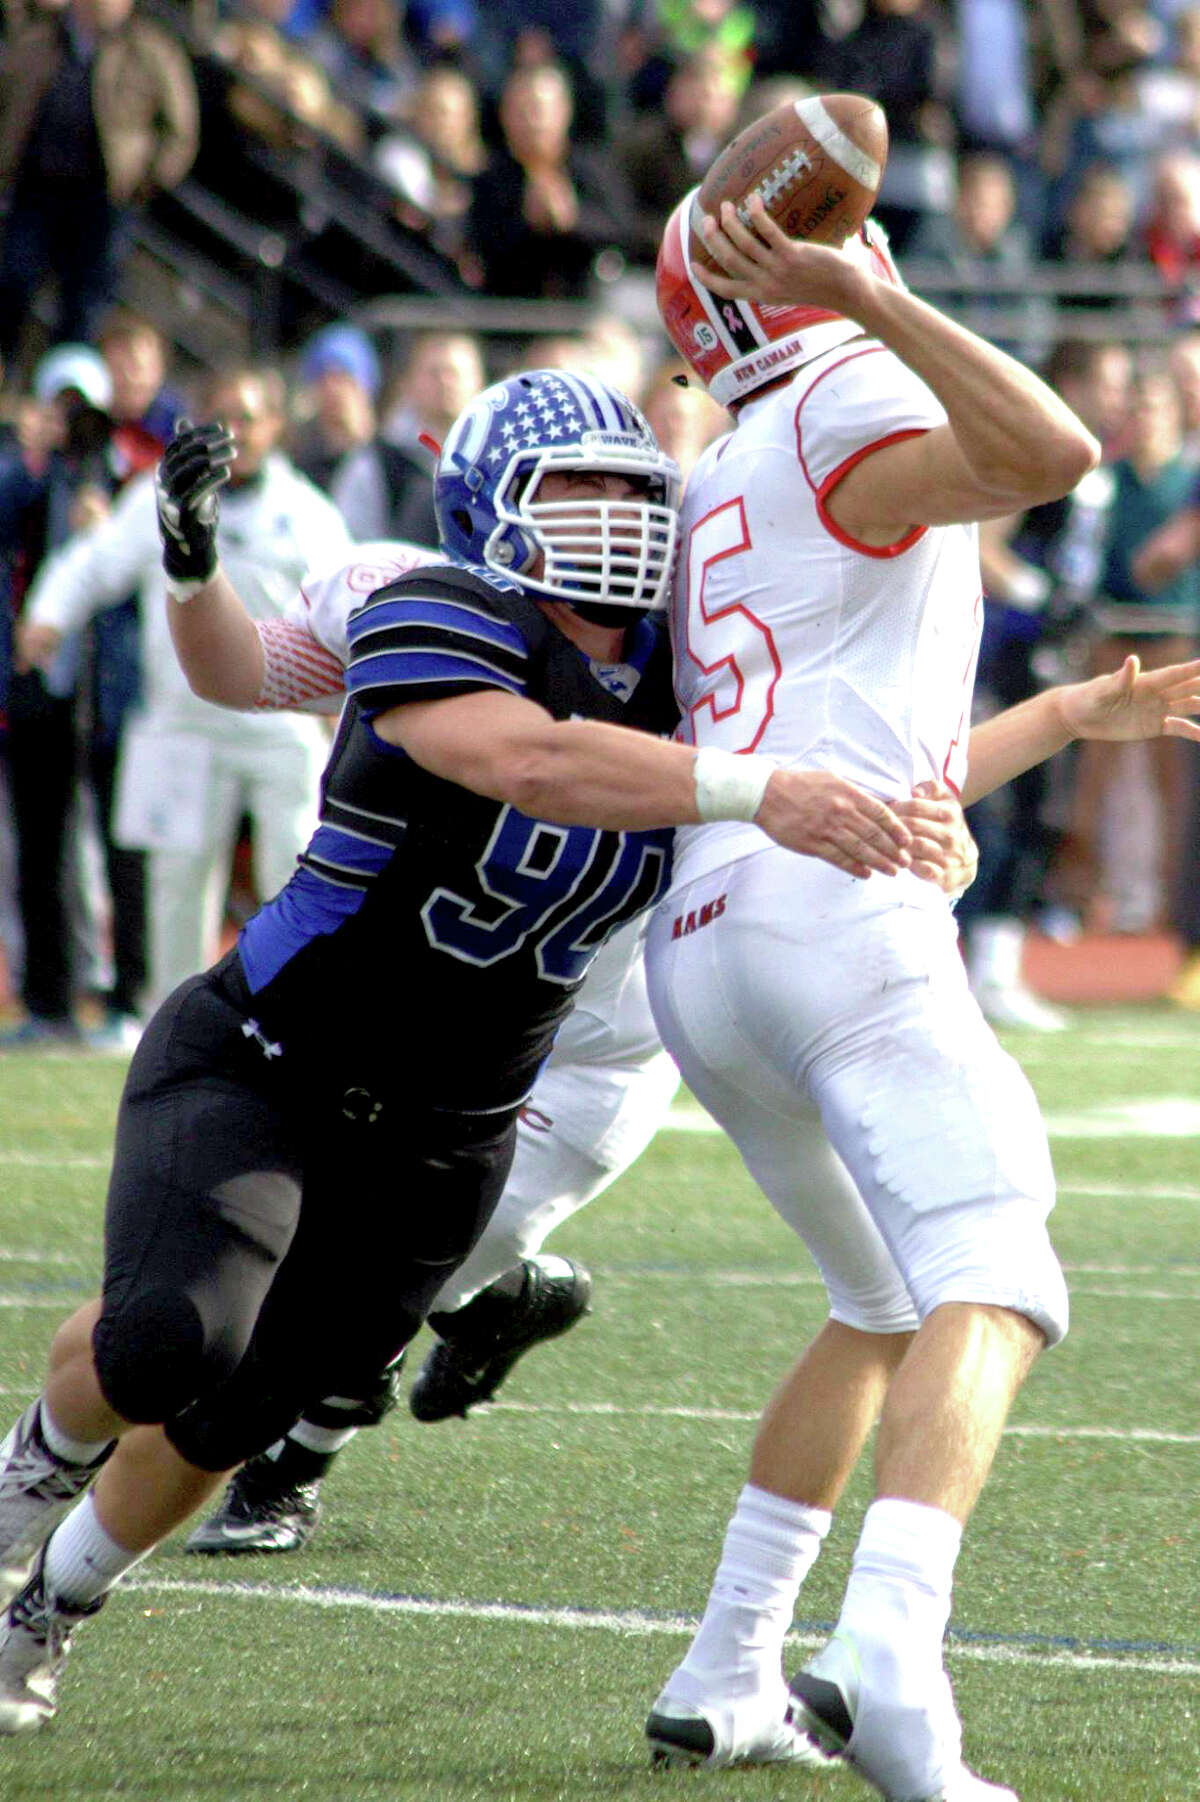 Darien’s Mark Evanchick sacks New Canaan’s Mike Collins during the FCIAC Championship at Boyle Stadium on Thanksgiving (Photo Charles Barthold, Darien Football)